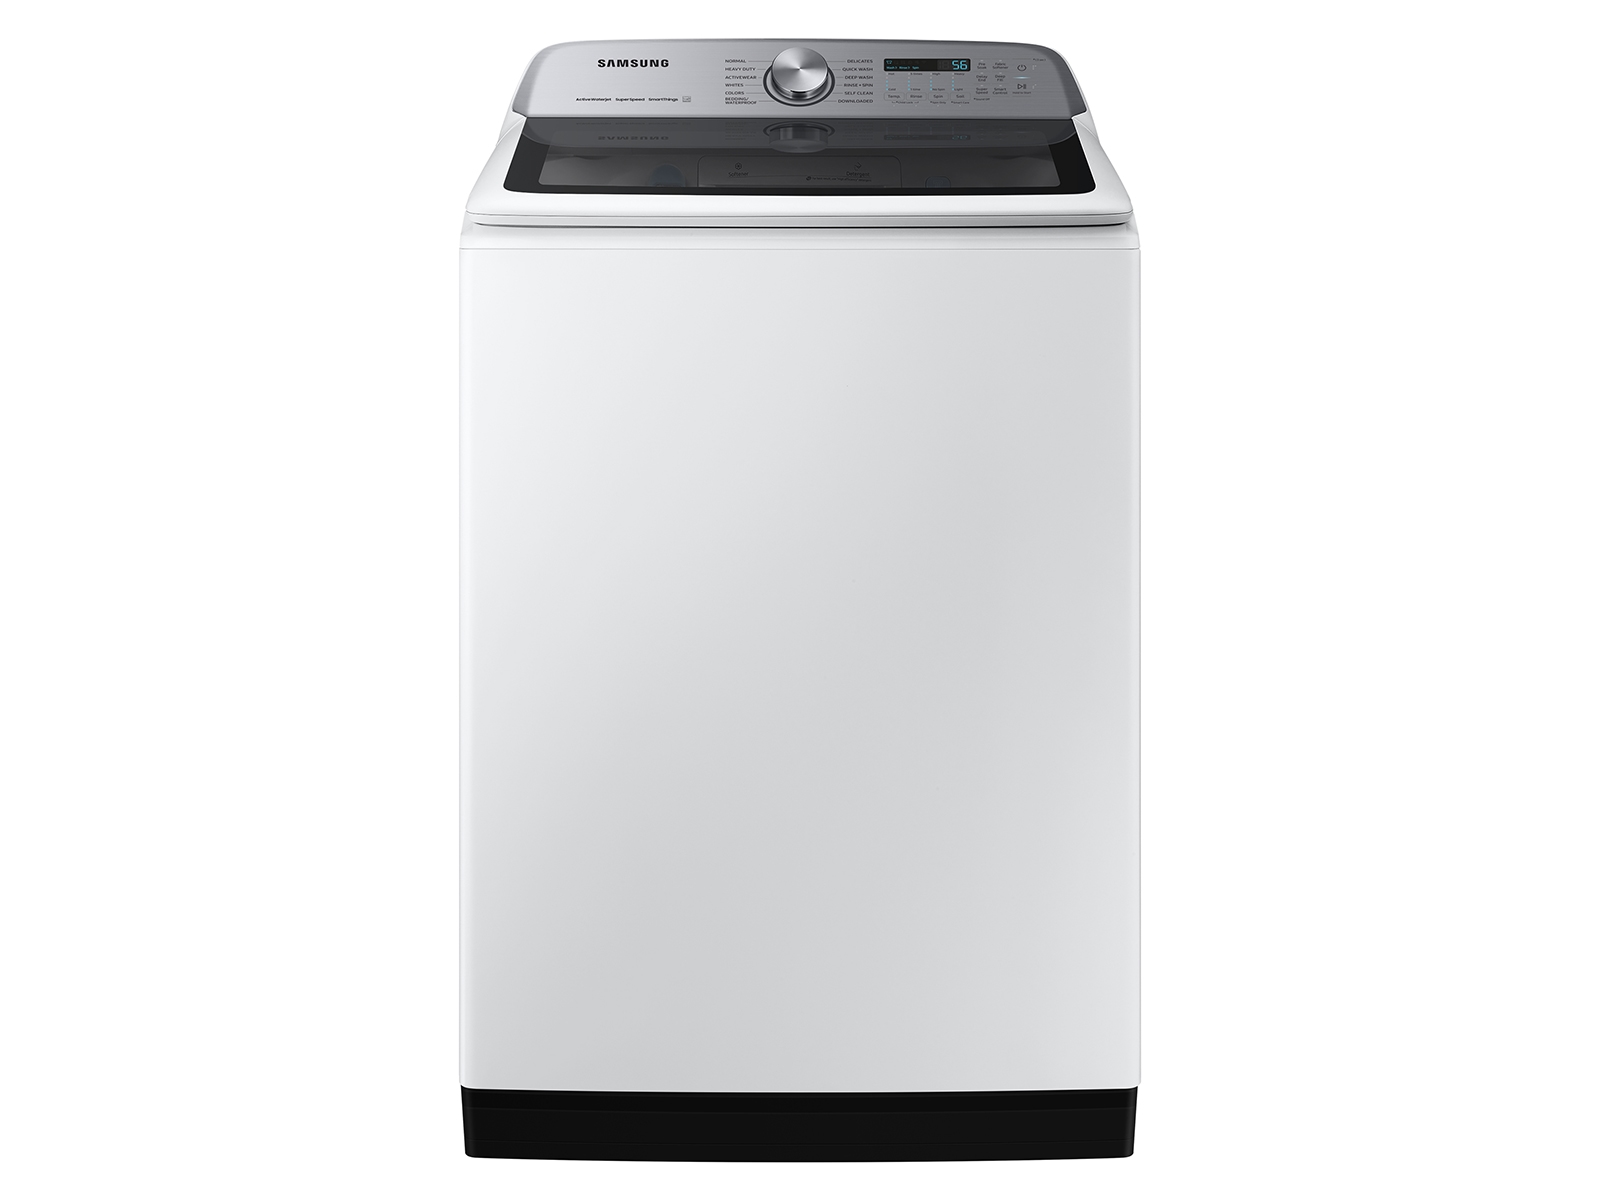 Photos - Washing Machine Samsung 5.5 cu. ft. Extra-Large Capacity Smart Top Load Washer with Super 